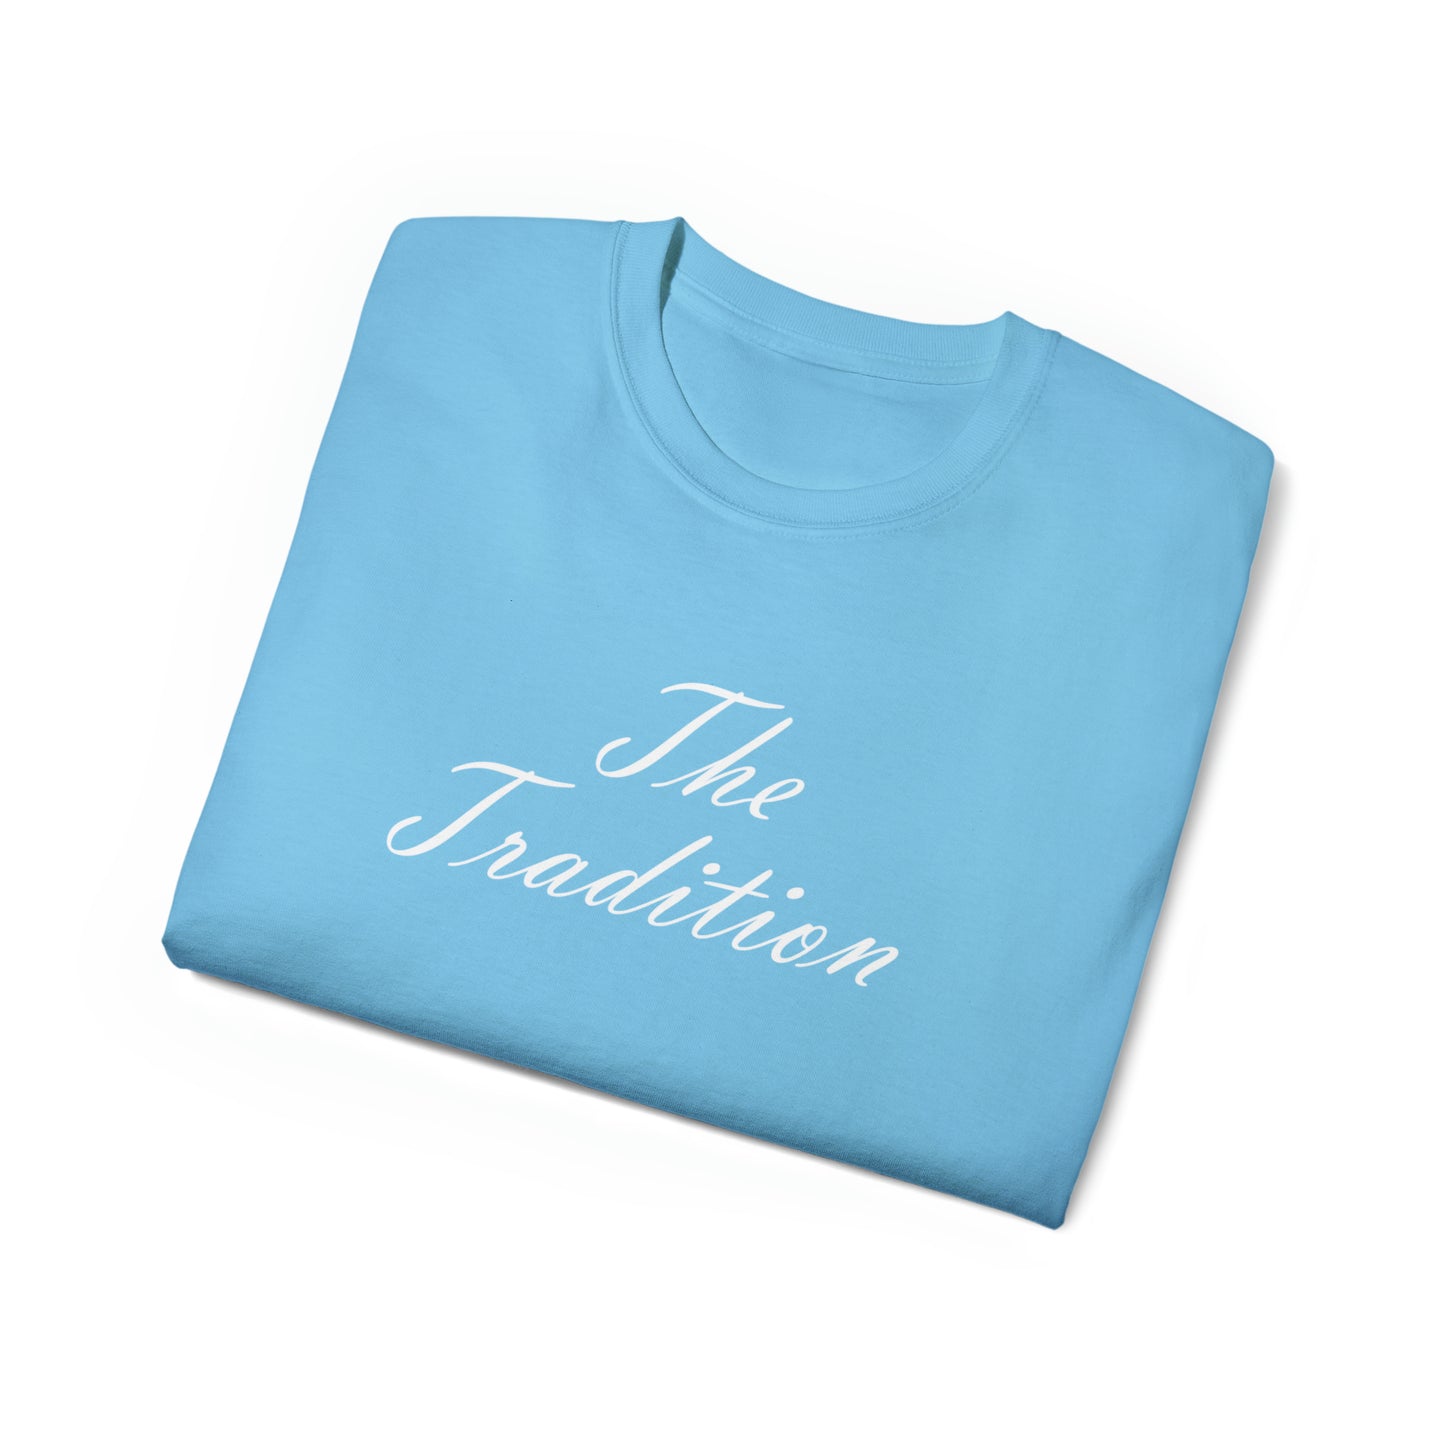 Le T-shirt Tradition